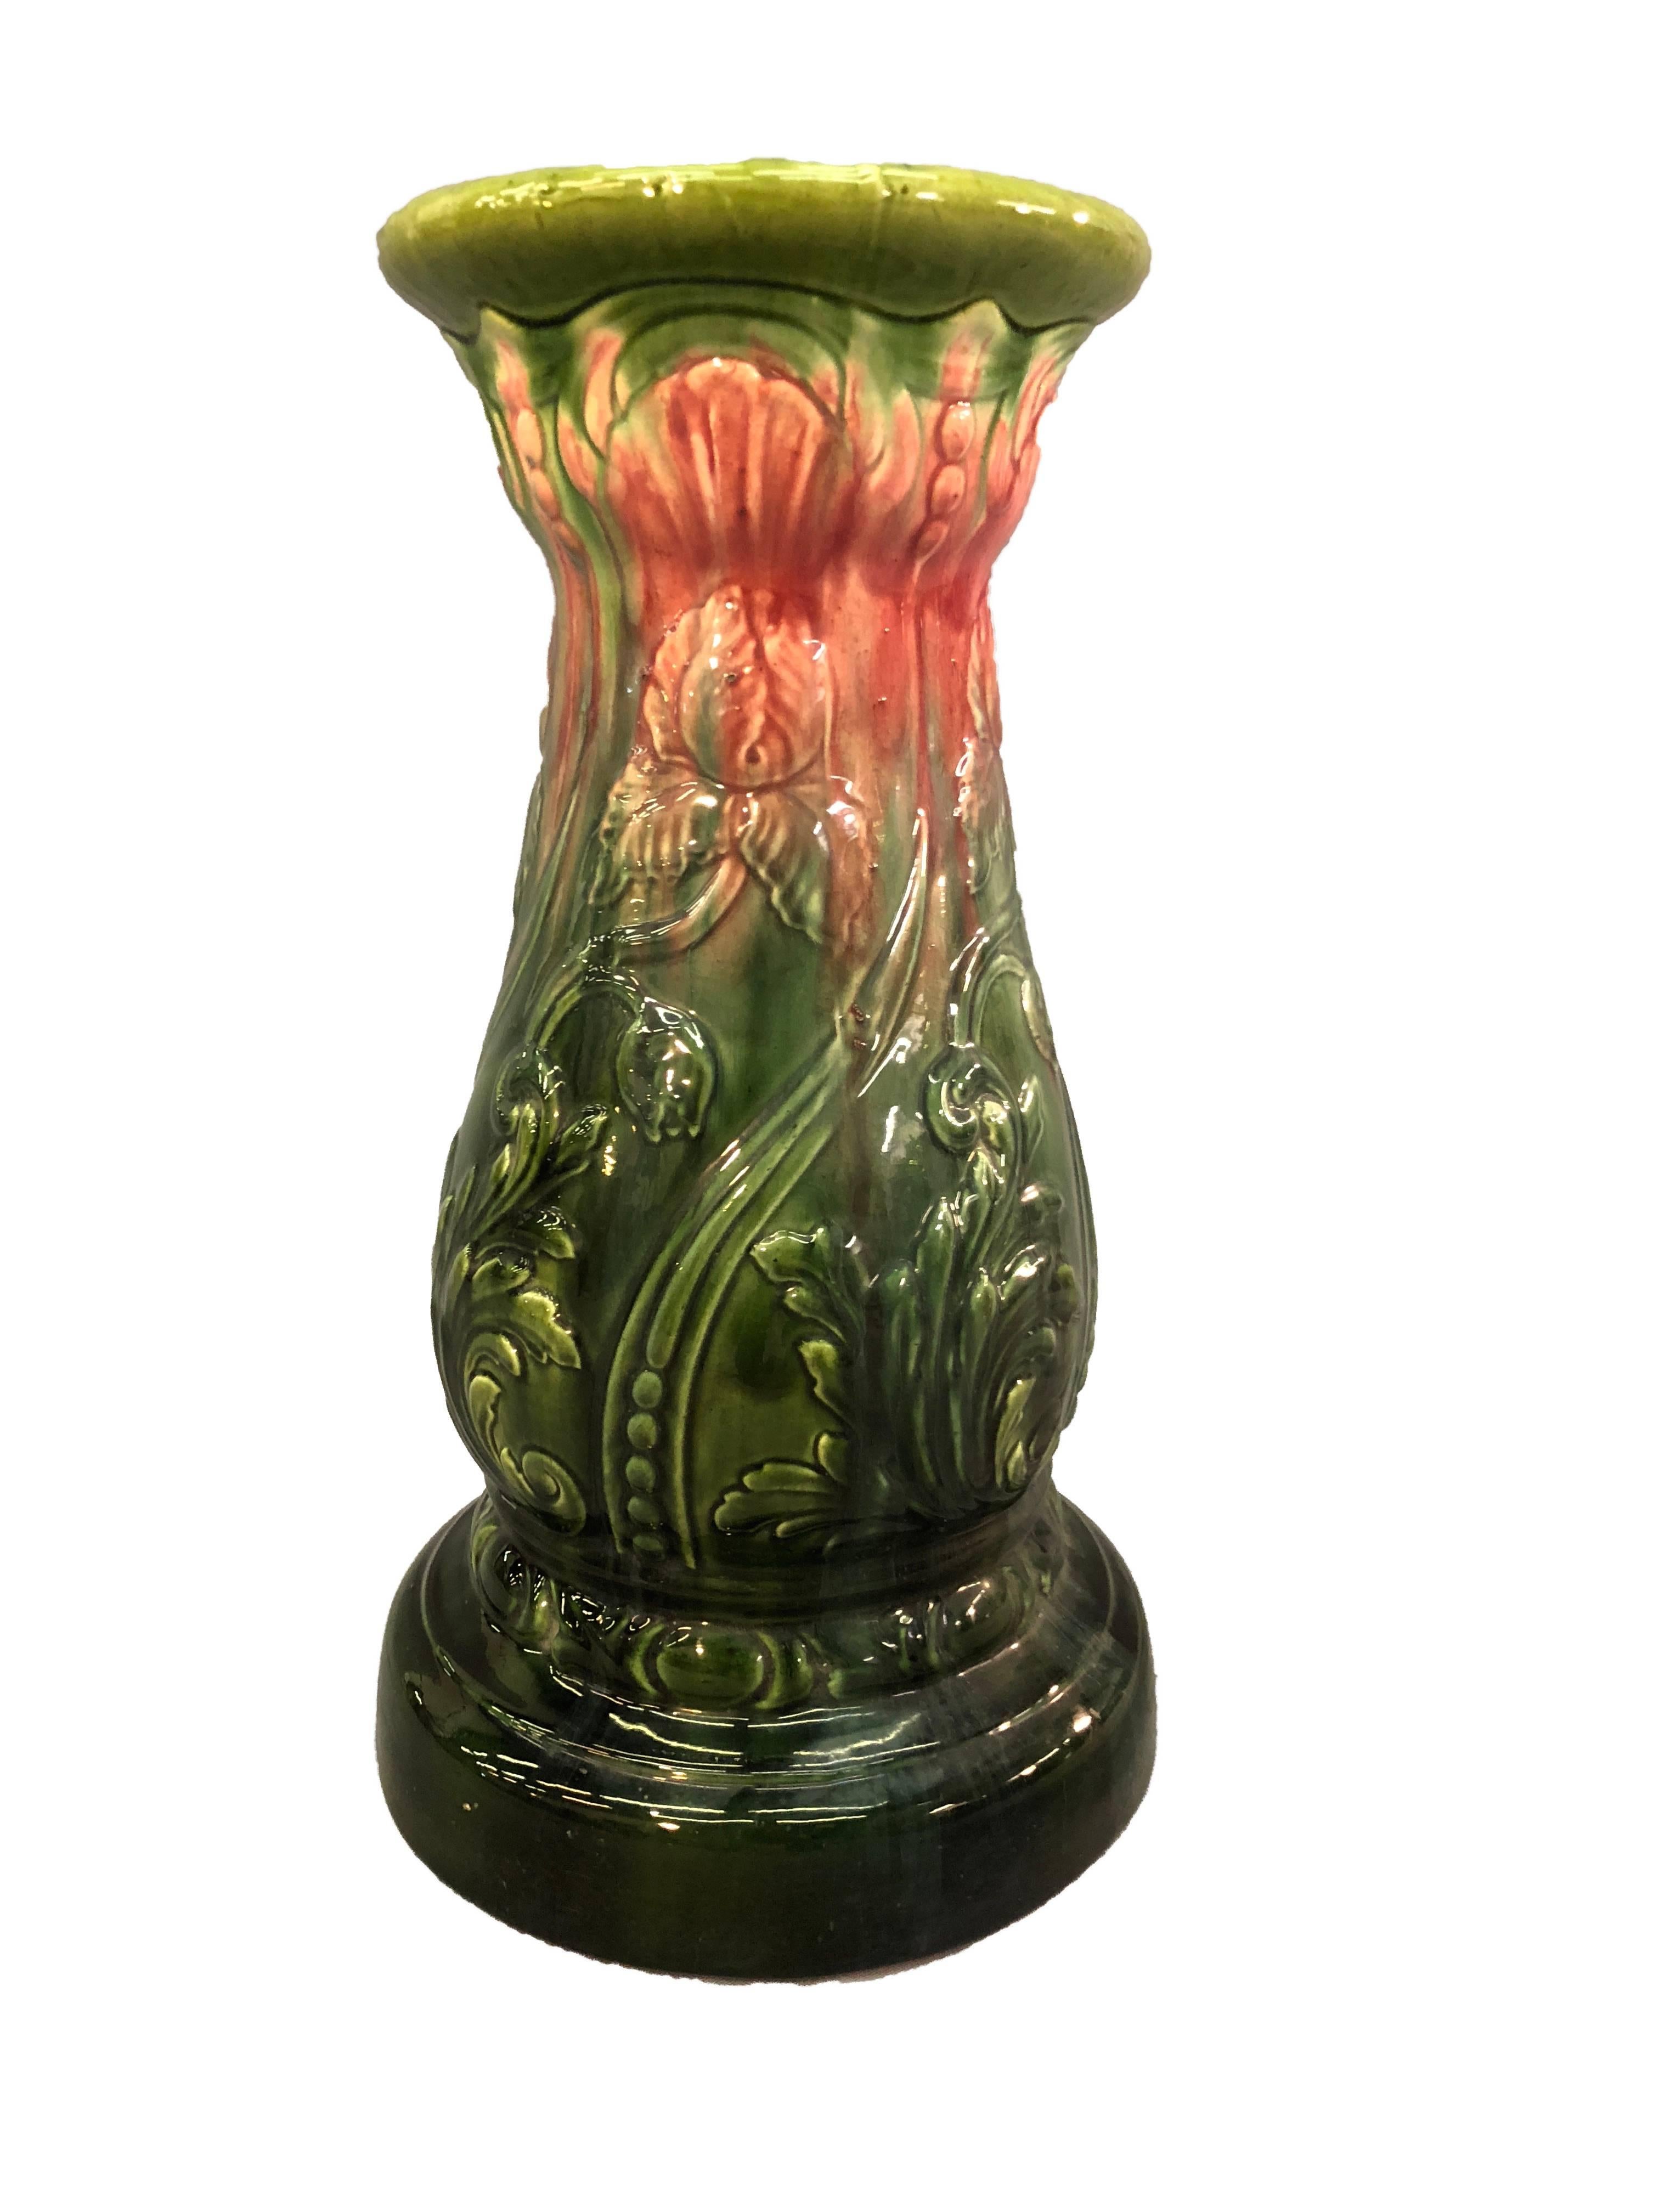 Early 1900s Majolica jardinière with a pedestal and a planter in a floral design. Small nick under planter and small nicks under the pedestal, all minor. Measures: Planter: 14in diameter x 12in height. Pedestal: 11.5in diameter x 20.5in height. No